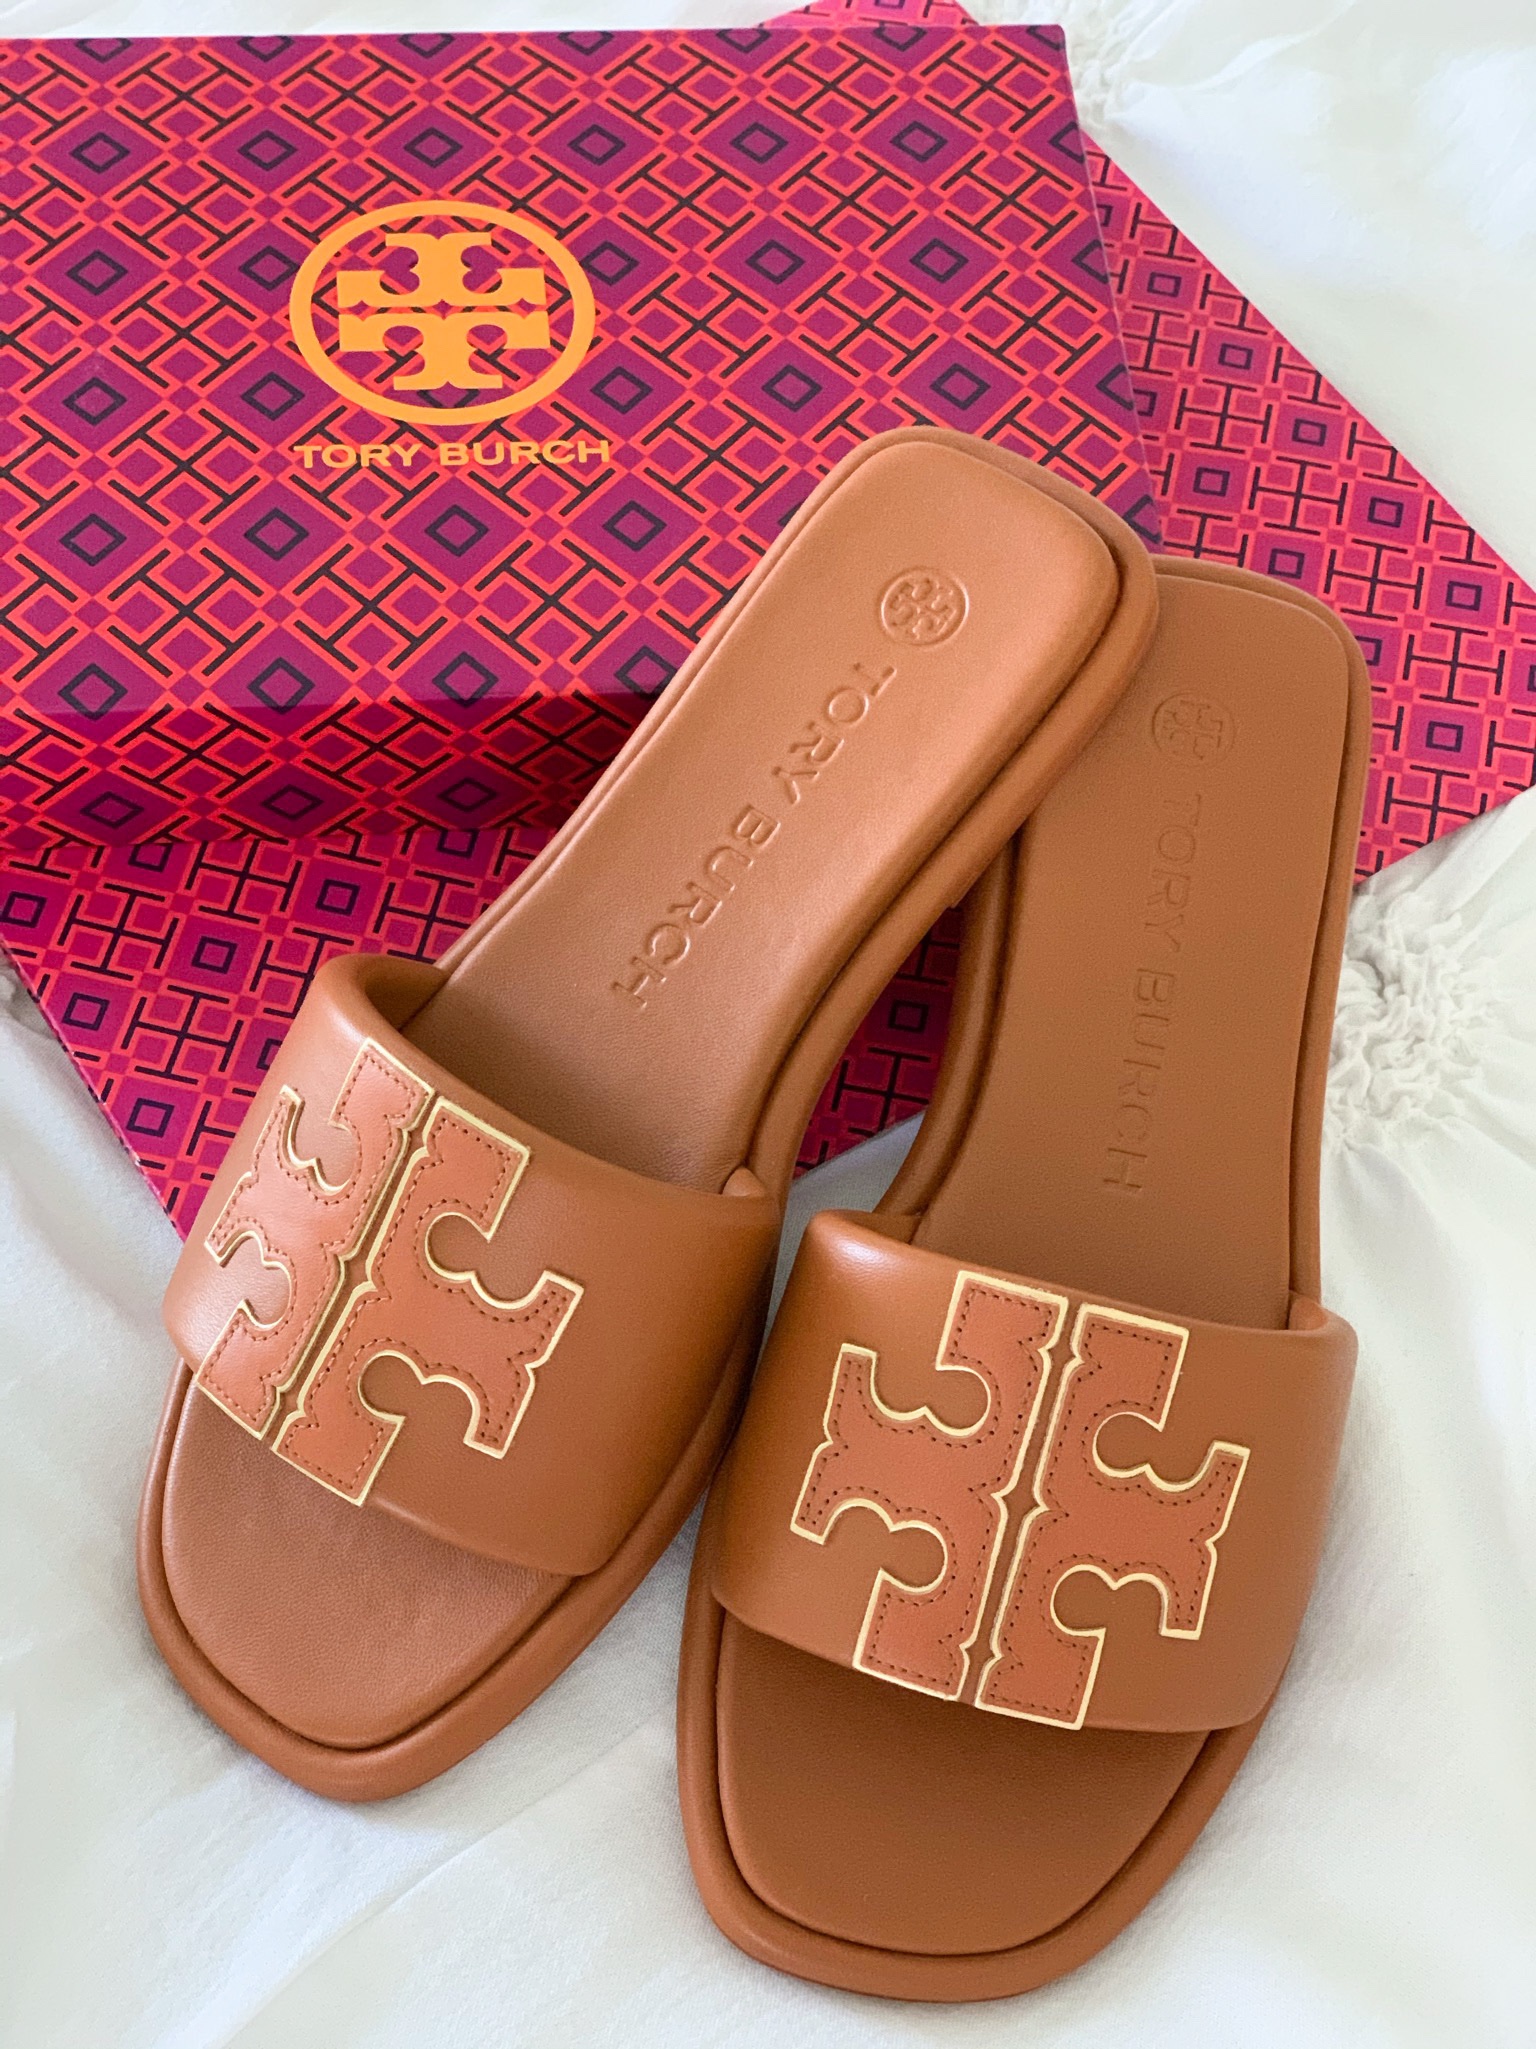 TORY BURCH CLOUD MILLER REVIEW & NEW & APPROVED PERRY TOTE 